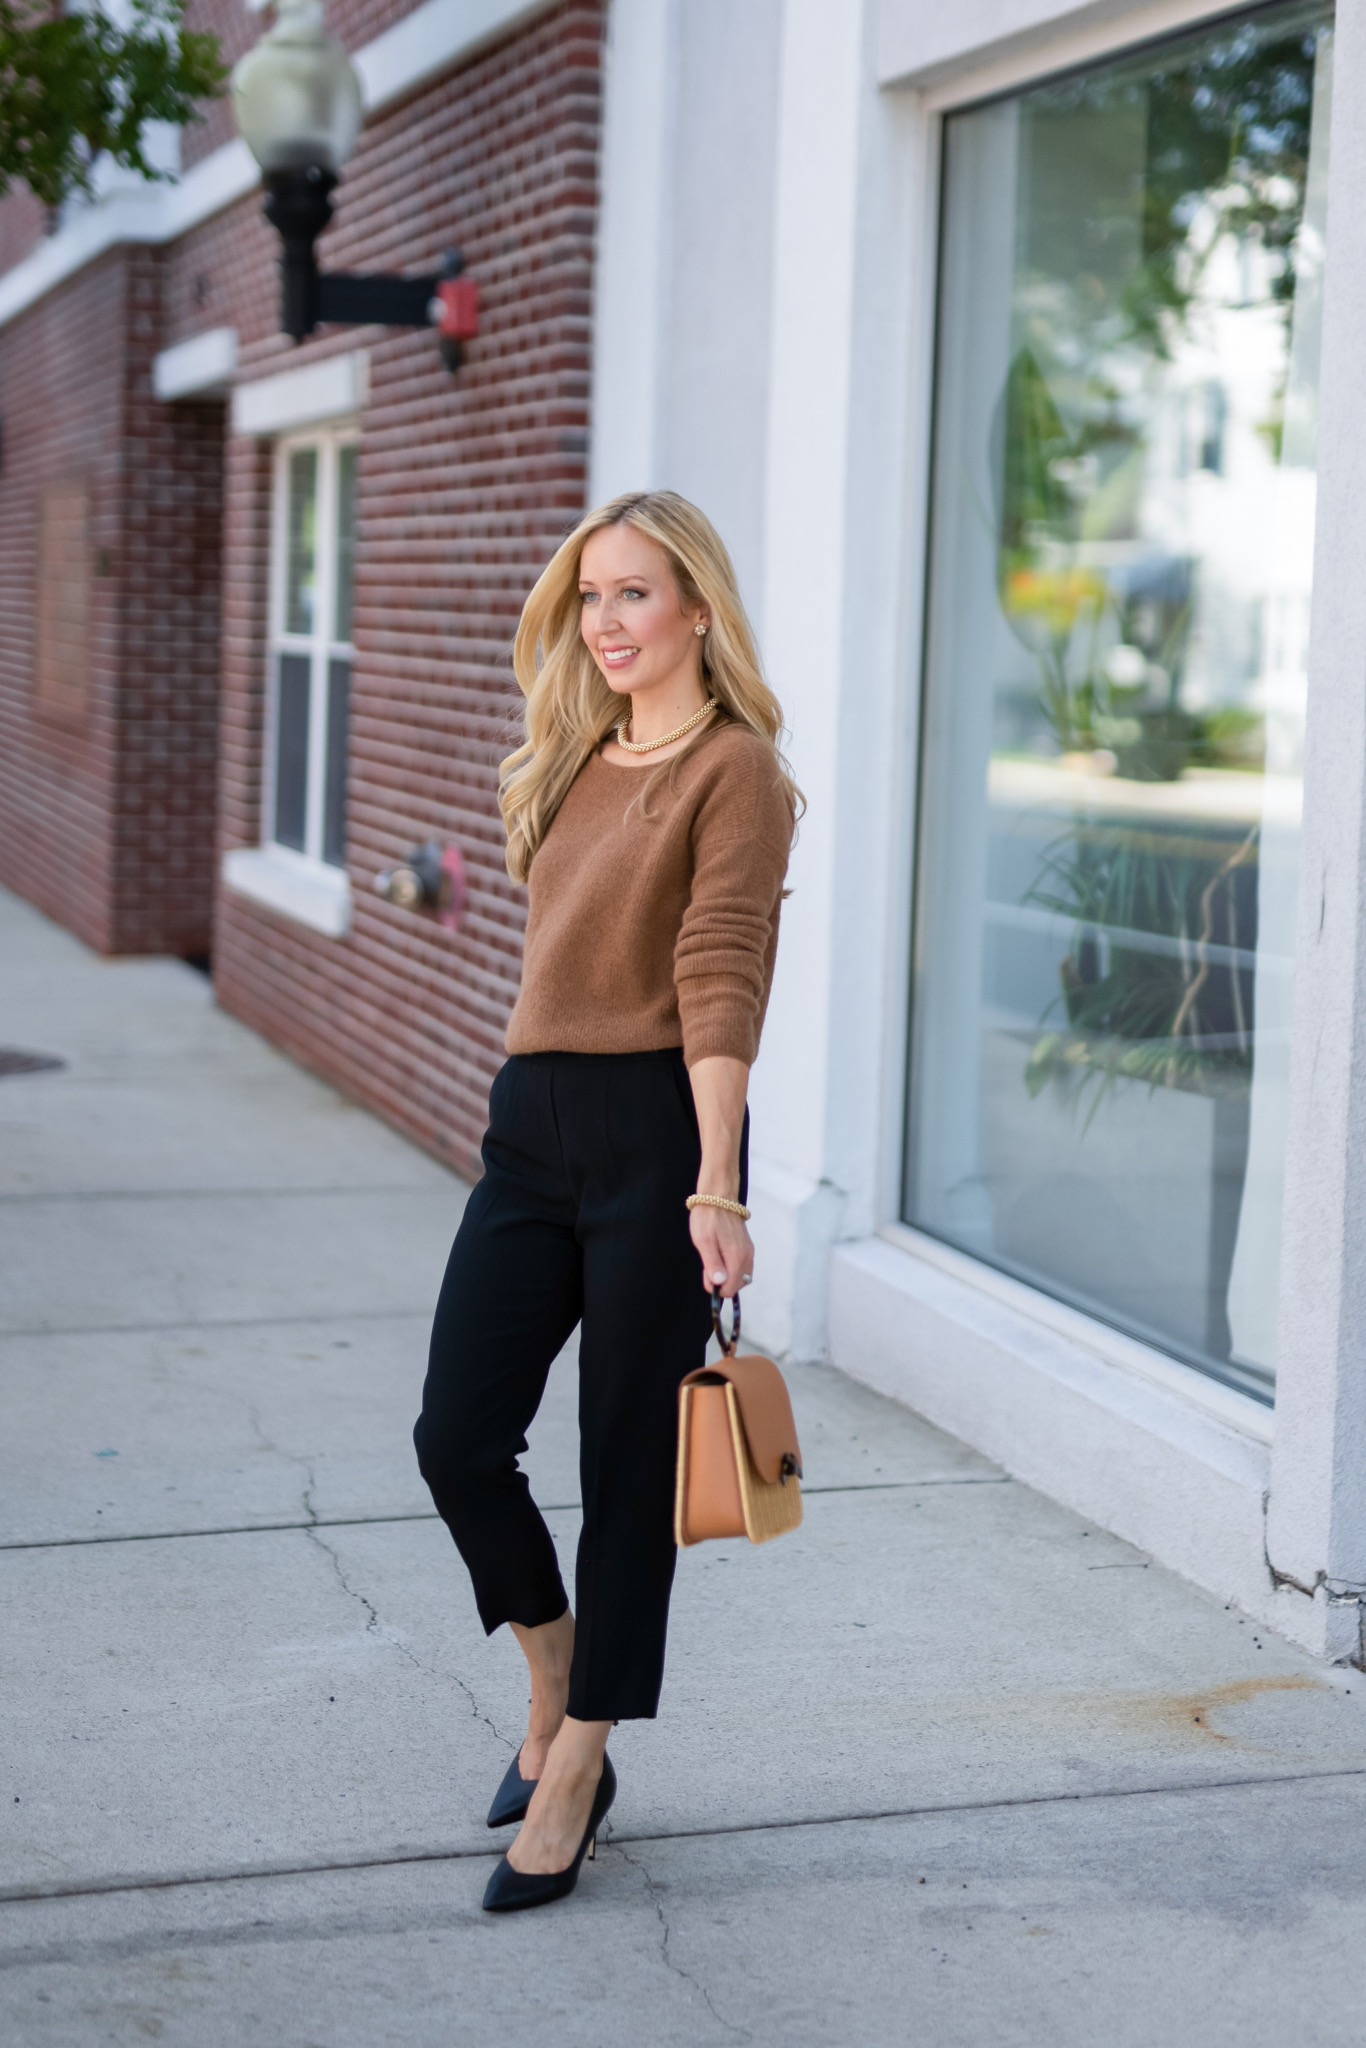 Business Casual After Working from Home - THE FASHION HOUSE MOM